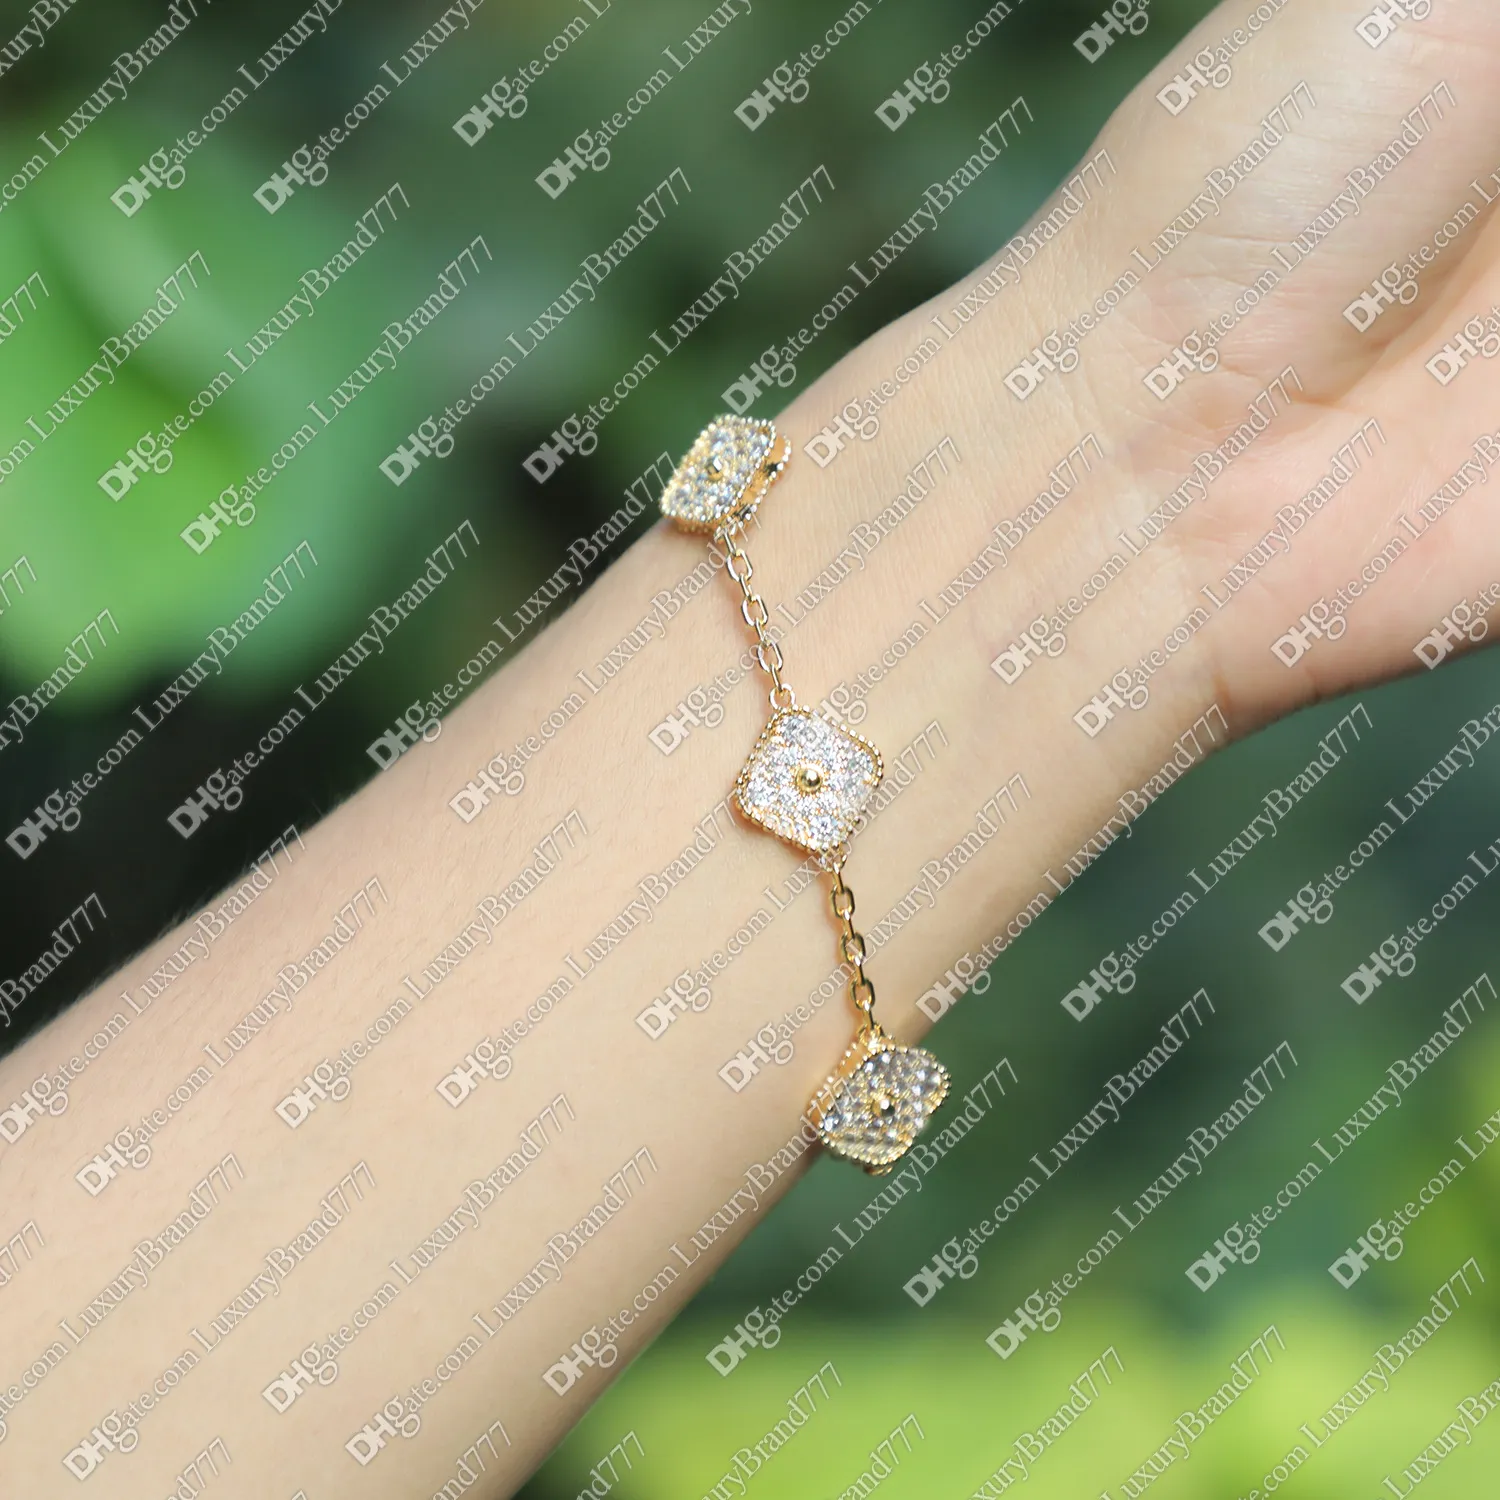 Fashion Classic Woman Bracelet 4 Four Leaf Clover Charm Jewelry Bracelet Elegant 18K Gold Agate Shell Pearl Mother and Daughter Co282j